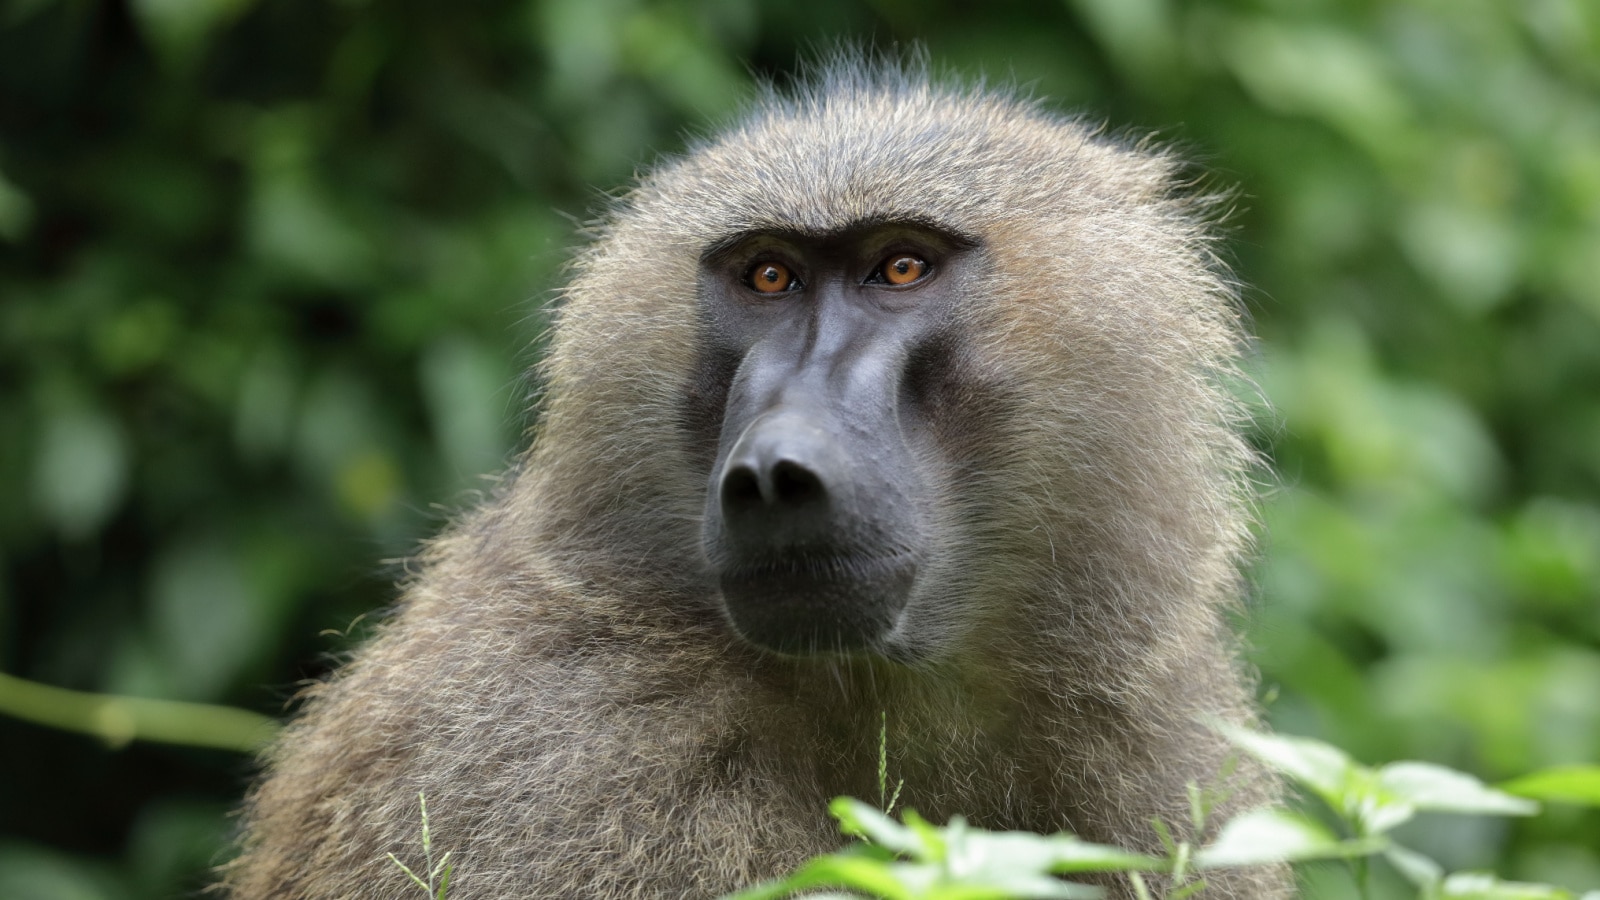 <p>You will find baboons in savannahs, tropical forests, and other semi-habits along the African wilderness. They are omnivores like you; you will see them eating plants and small animals.</p>